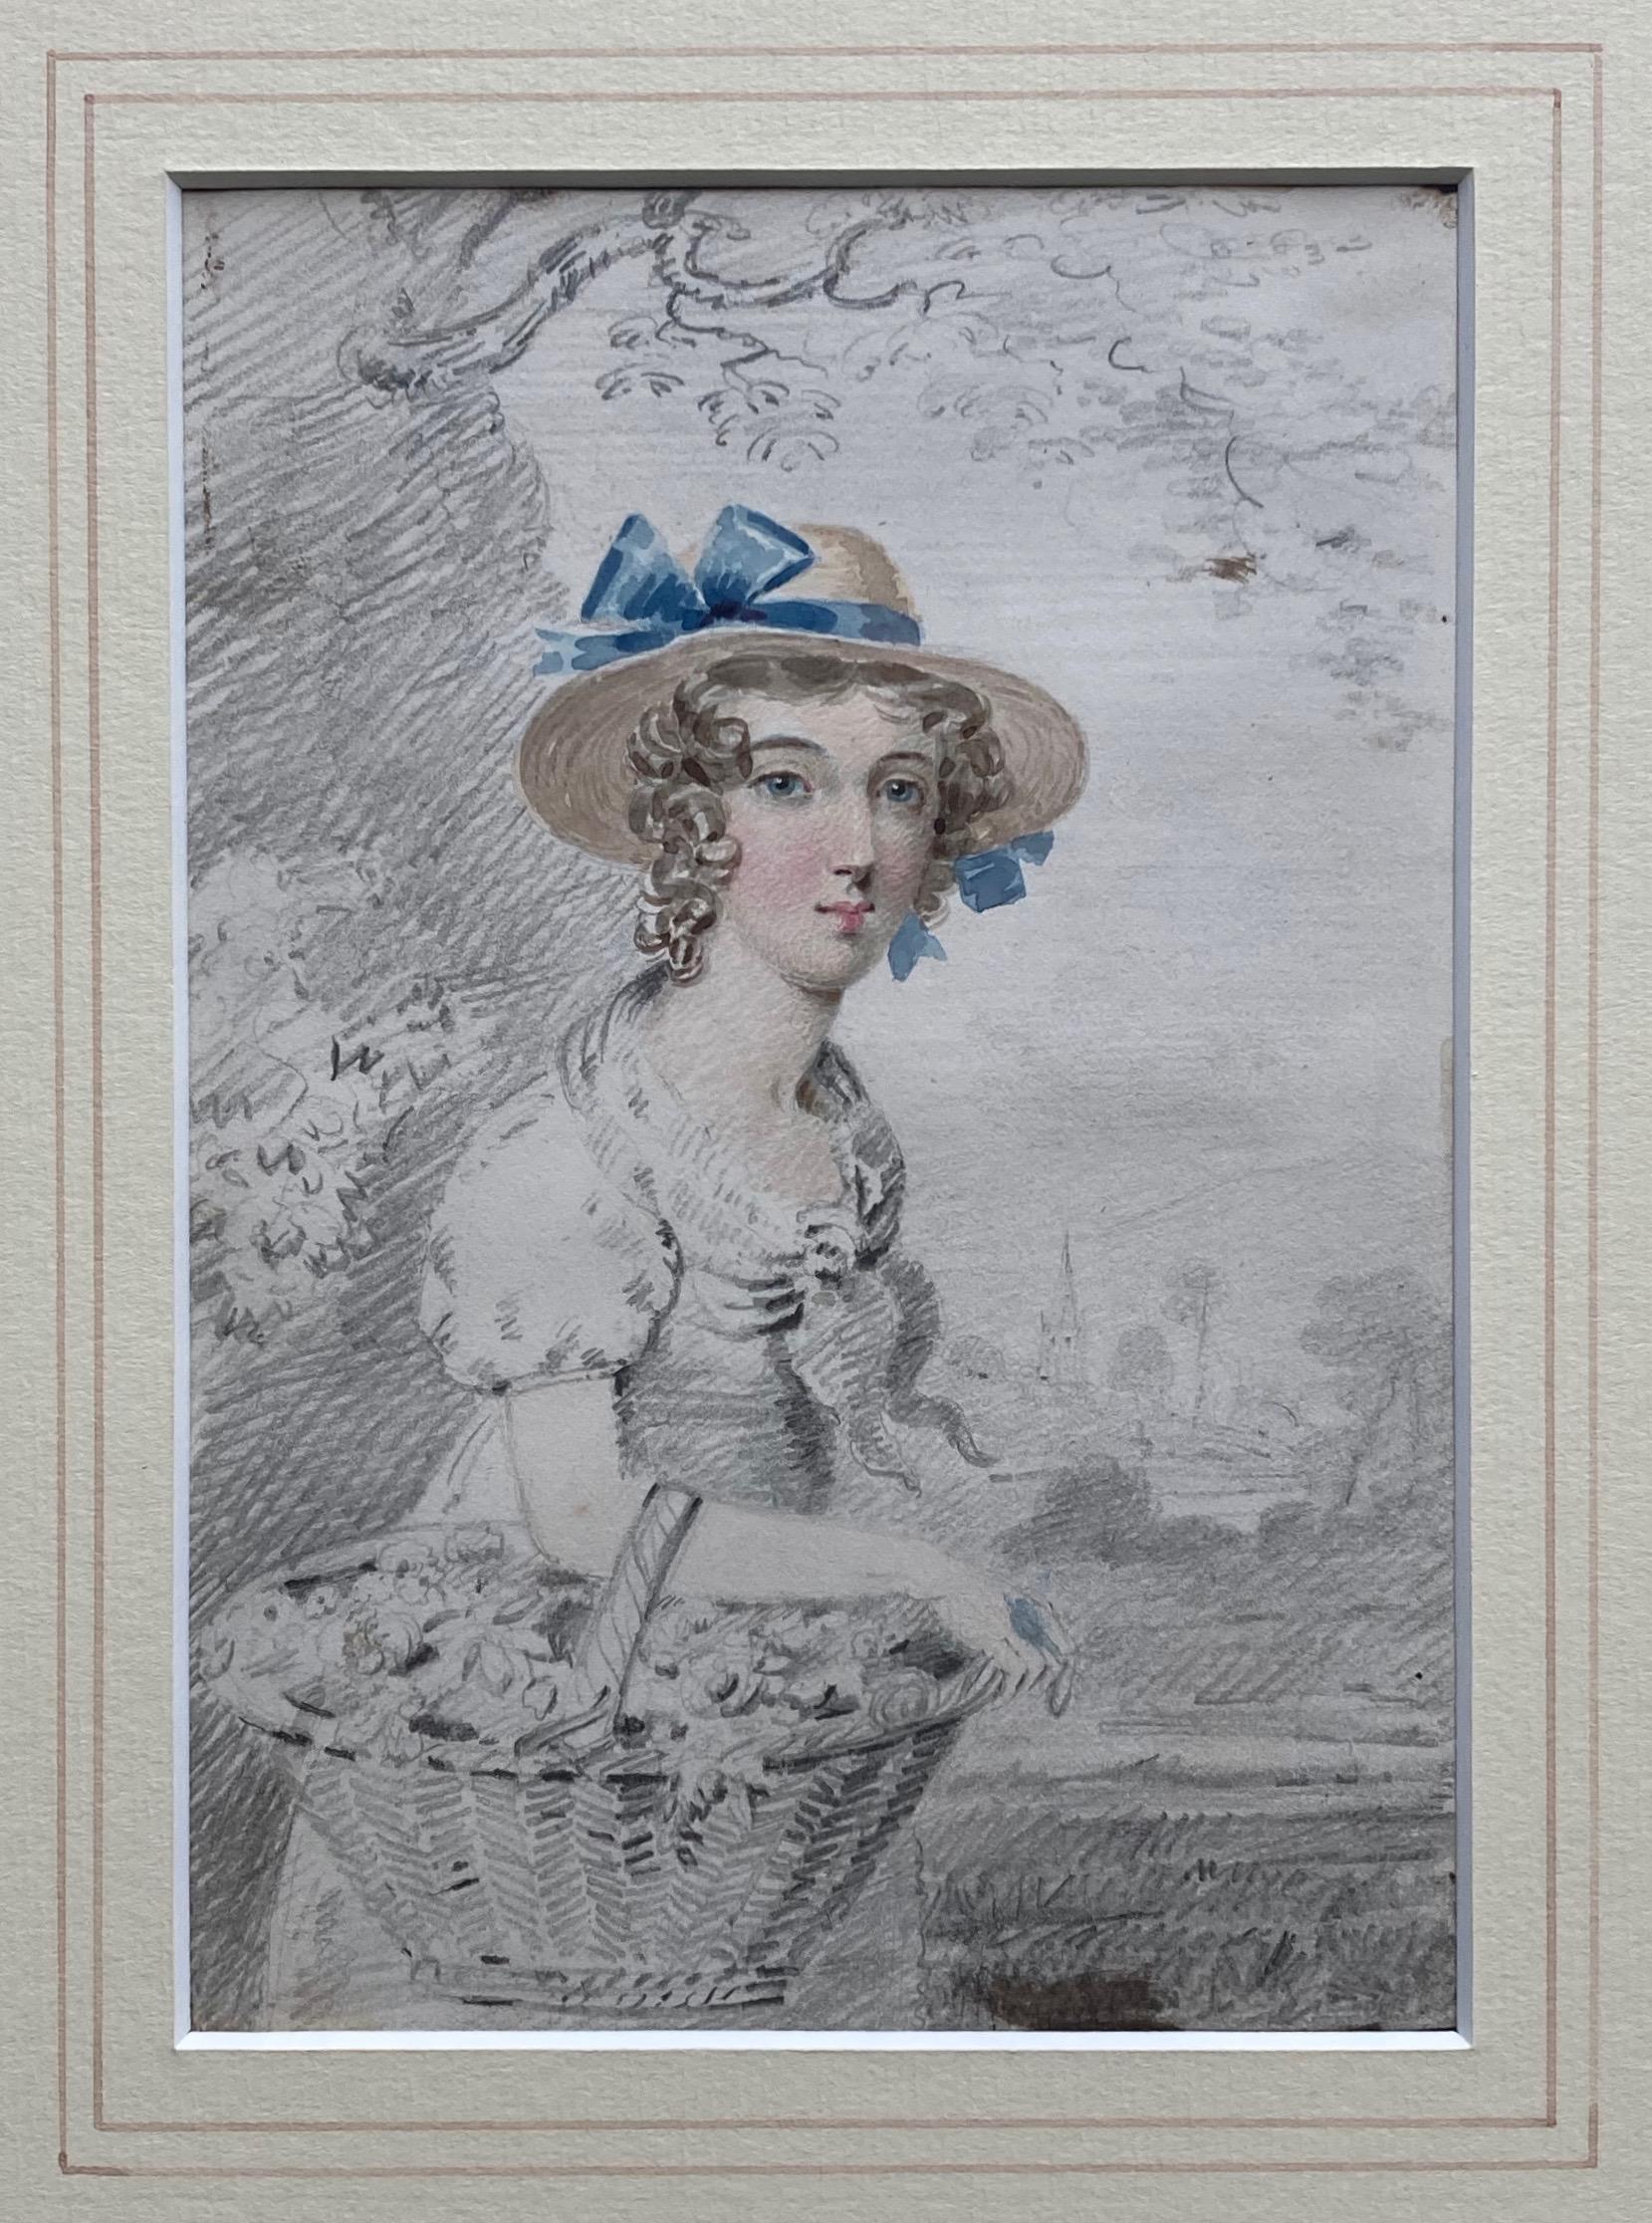 Follower of Francis Wheatley, 19th century portrait of young maiden with flowers